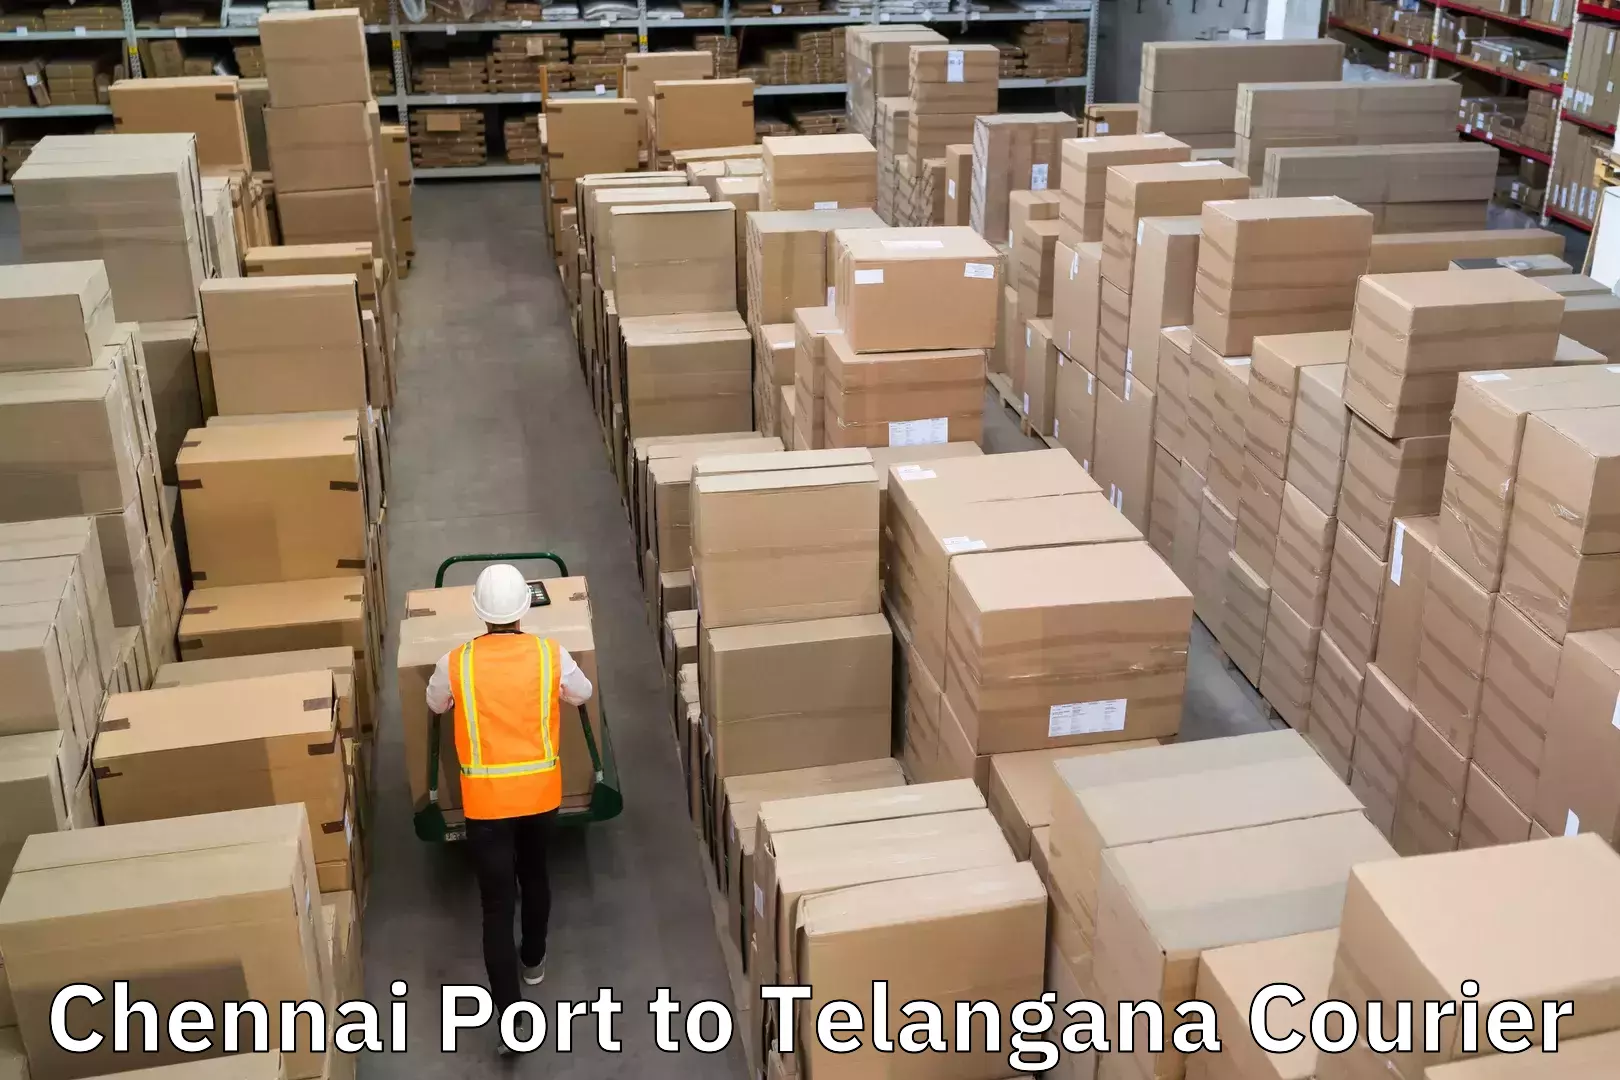 Express package delivery Chennai Port to Telangana